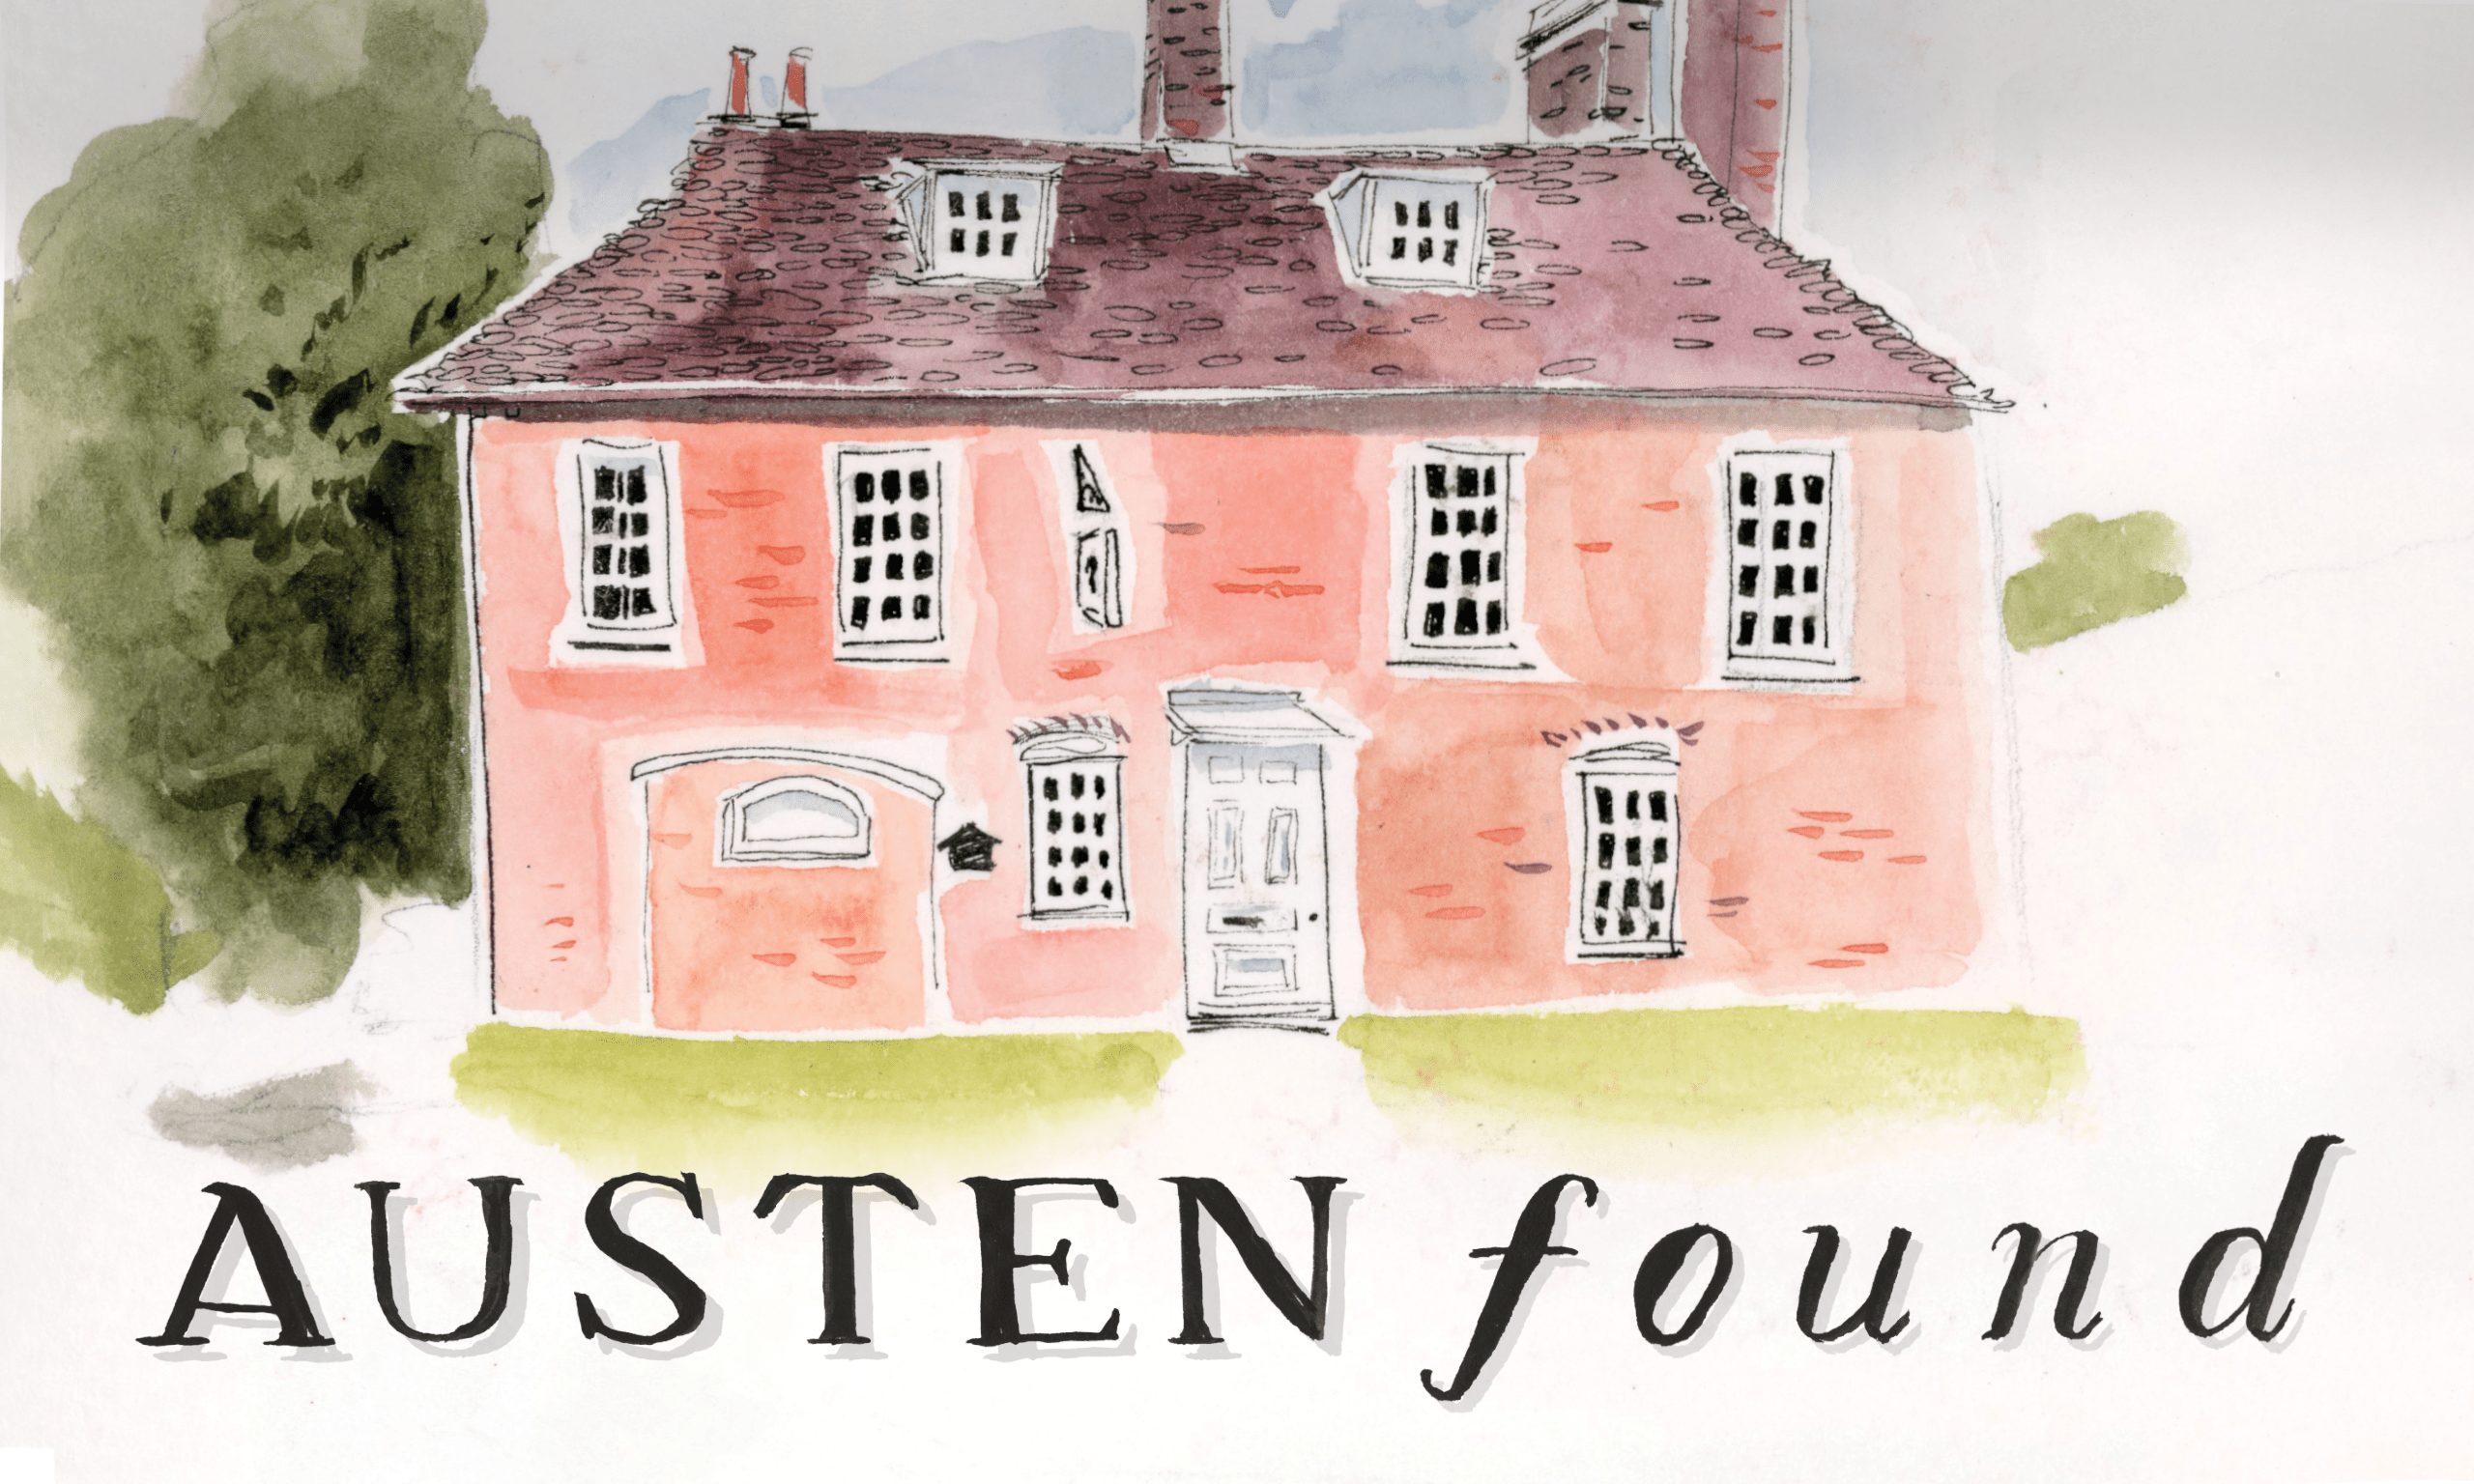 A watercolor illustration of a red English country home with the words "Austen Found" at the bottom.